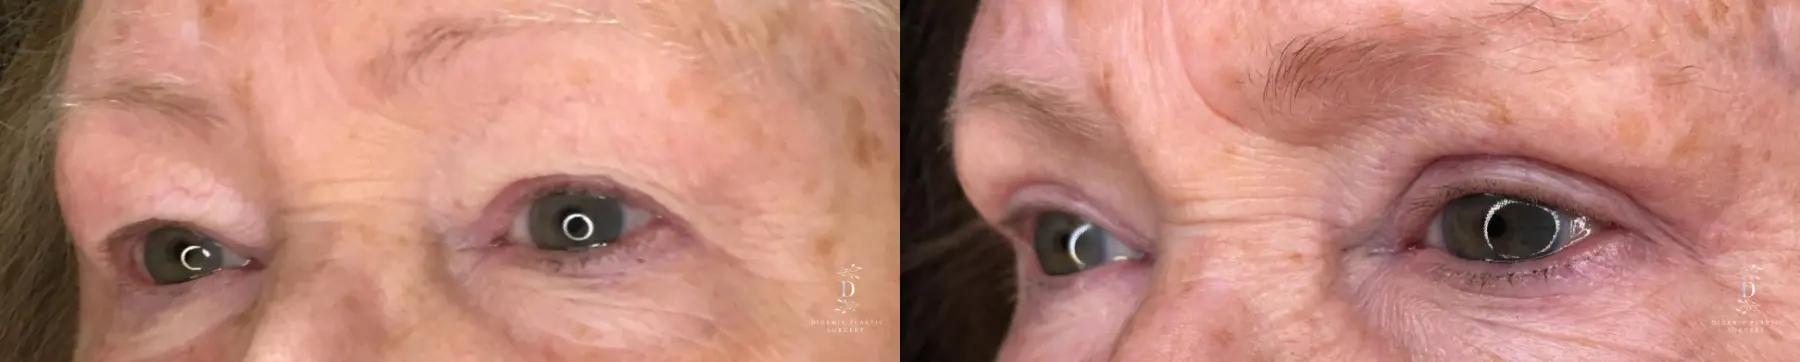 Eyelid Surgery: Patient 25 - Before and After 4